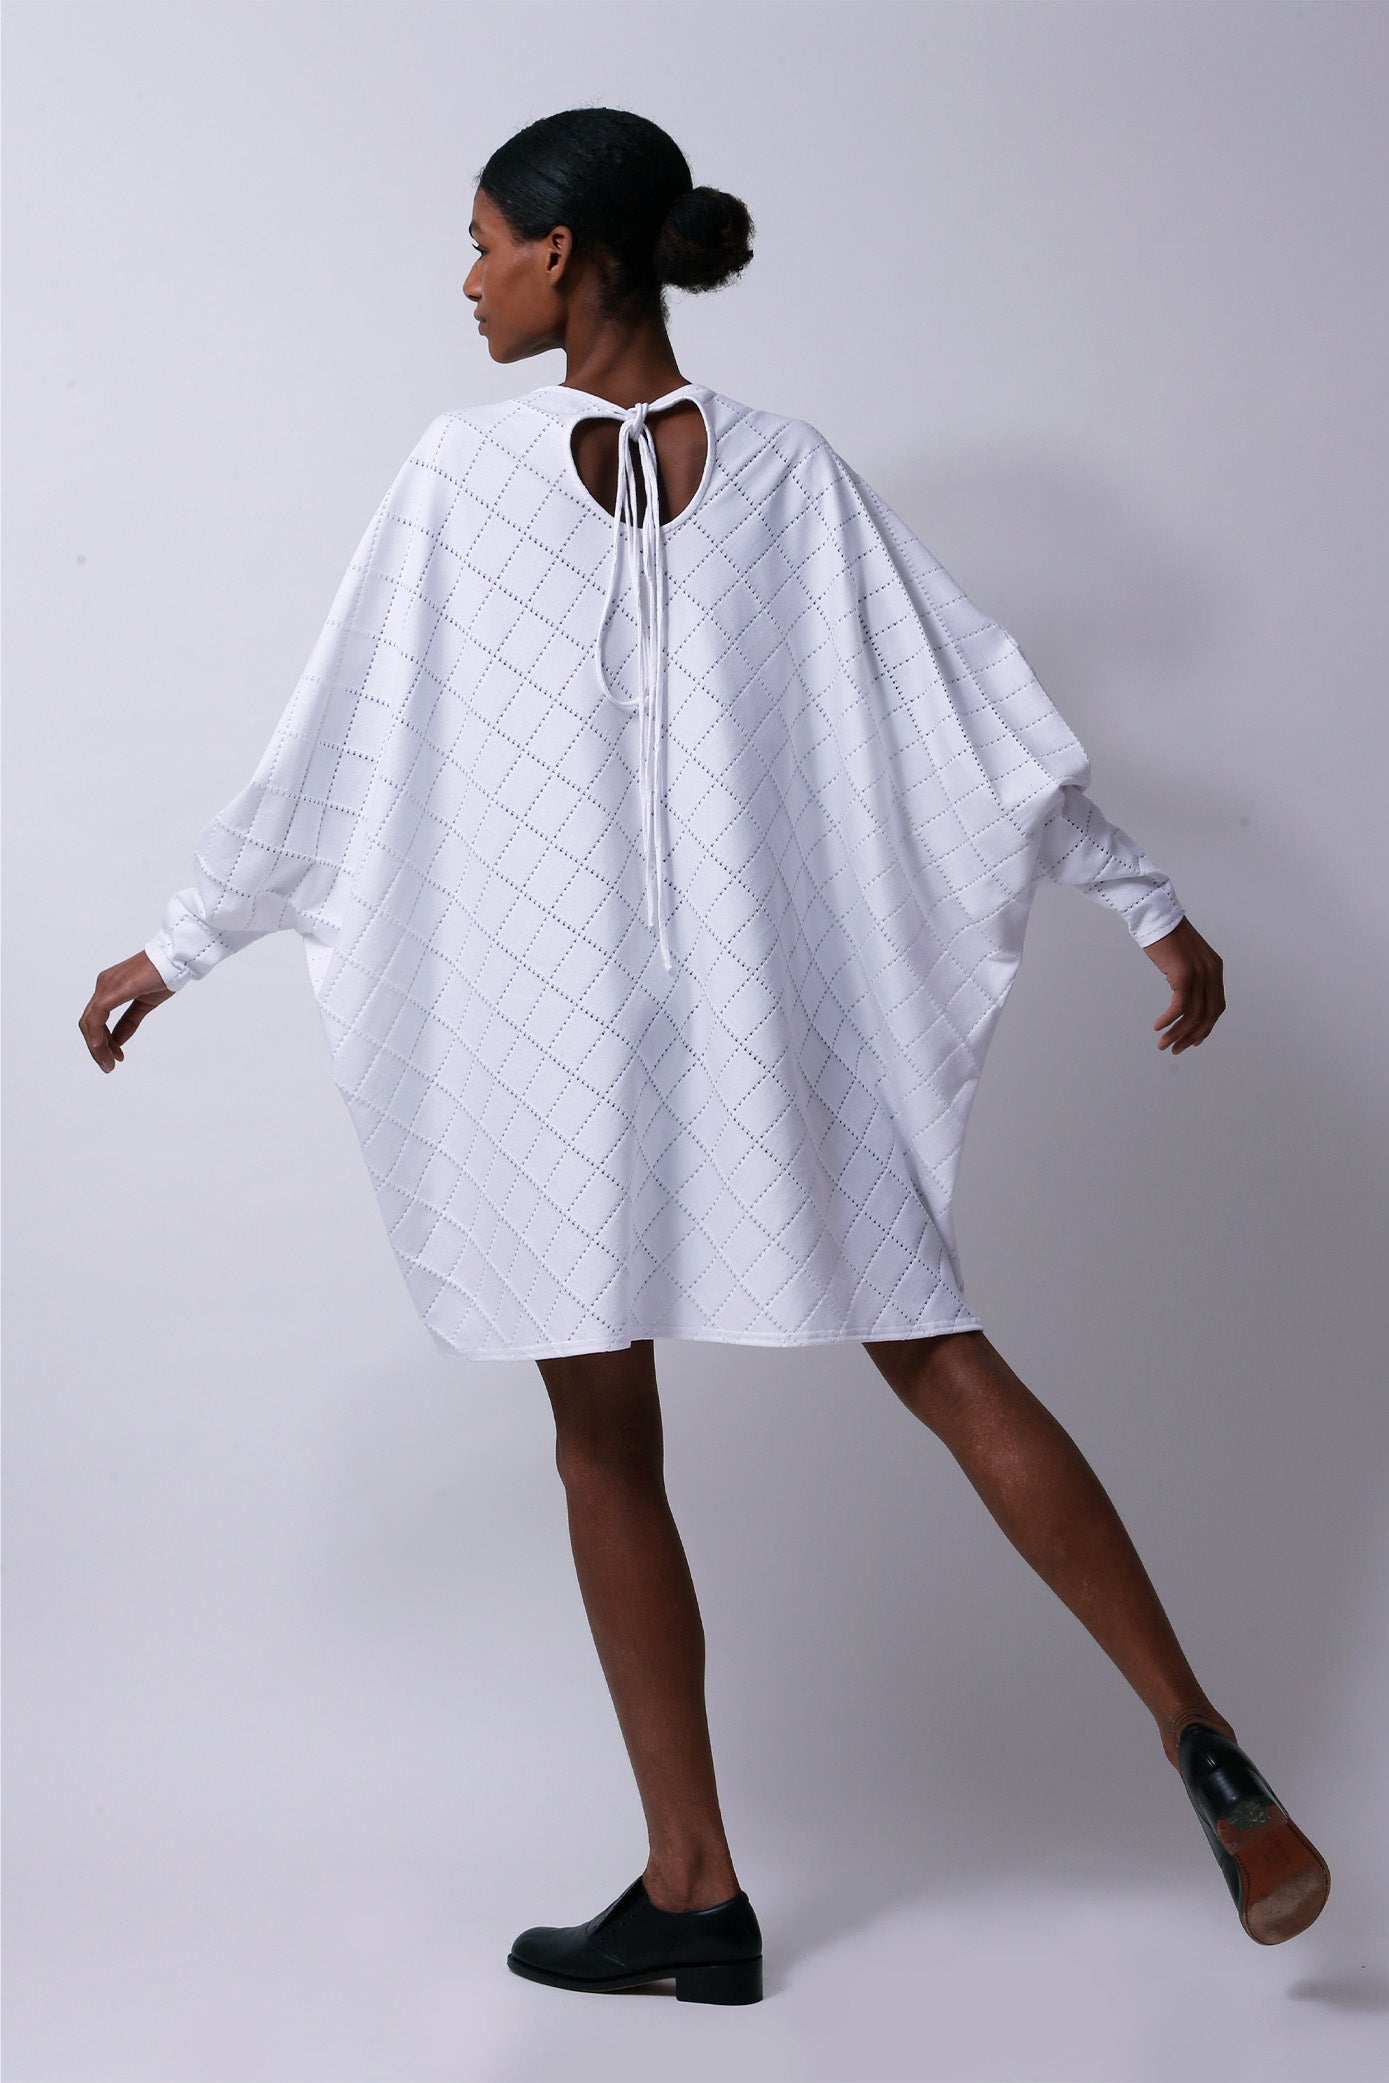 White Biscuit Cotton Jersey Dress